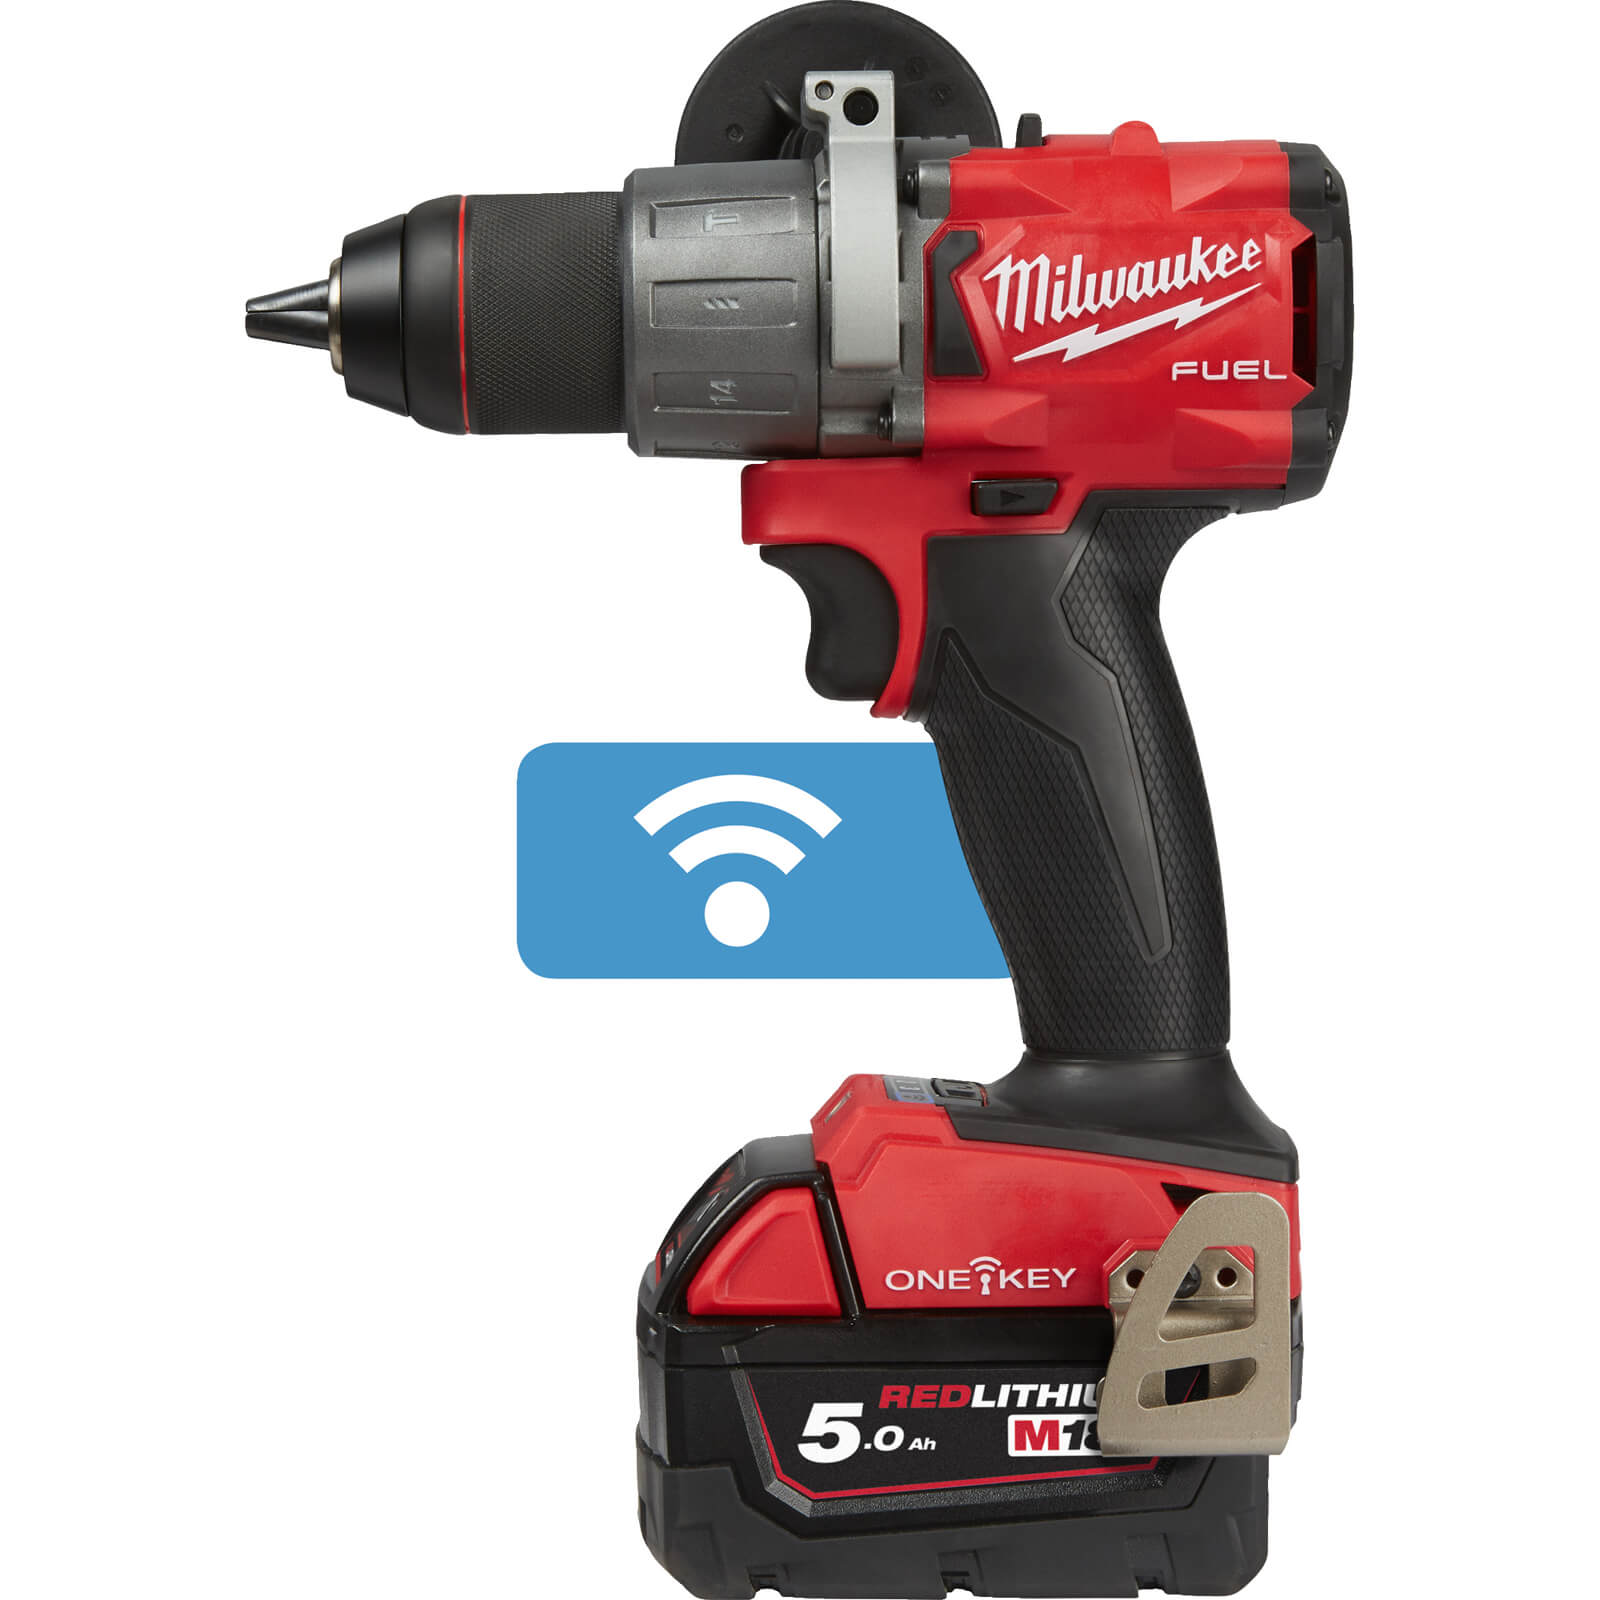 Image of Milwaukee M18 ONEPD2 Fuel 18v Cordless Brushless Combi Drill 2 x 5ah Li-ion Charger Case